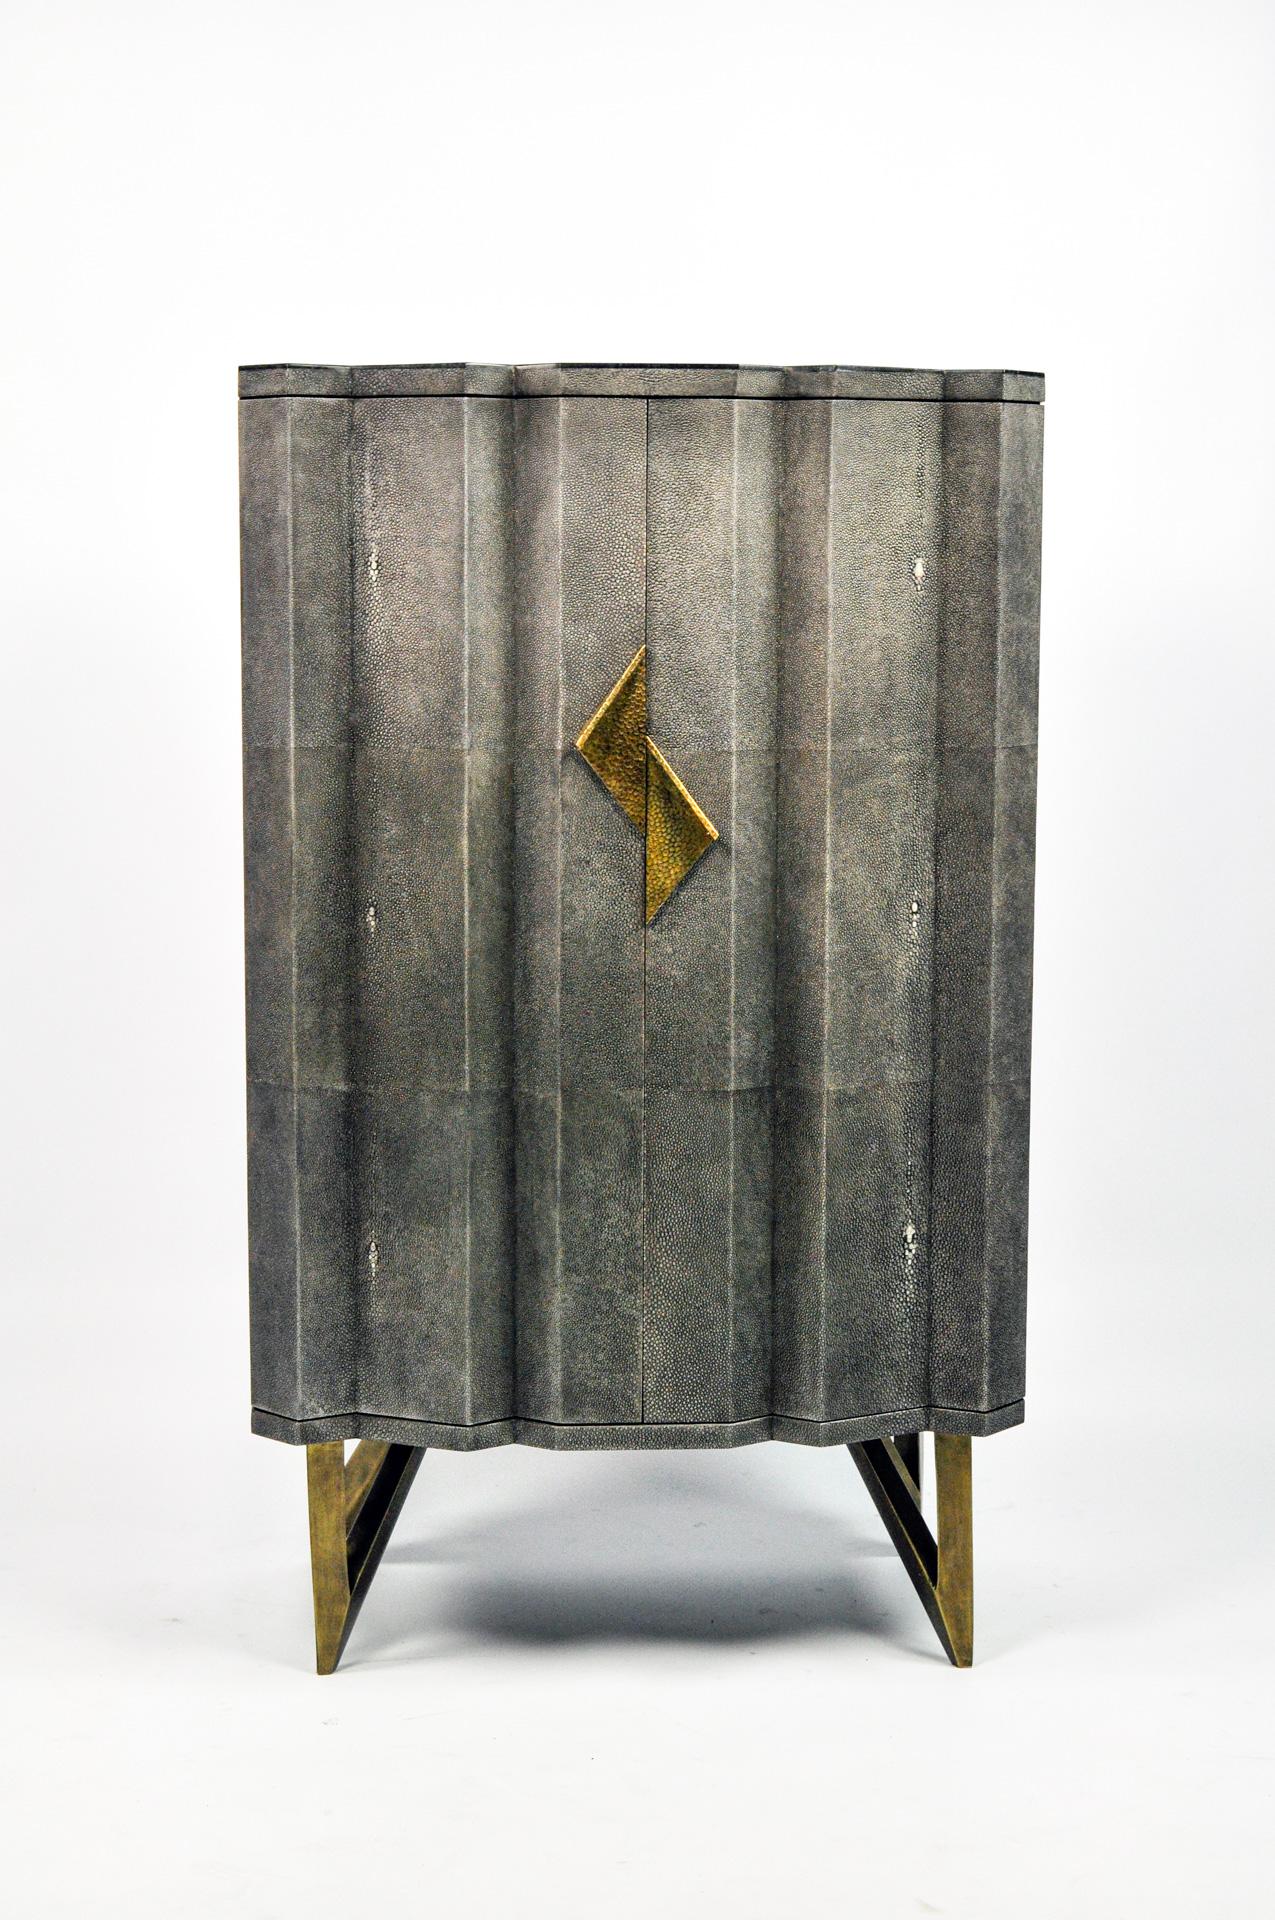 This cabinet has two doors and it is made of black stone marquetry on top and sides. The doors are made of shagreen in a dark grey color, with casted brass handles.
The feet are in metal with a bronze patina.

The interior with 2 shelves is in